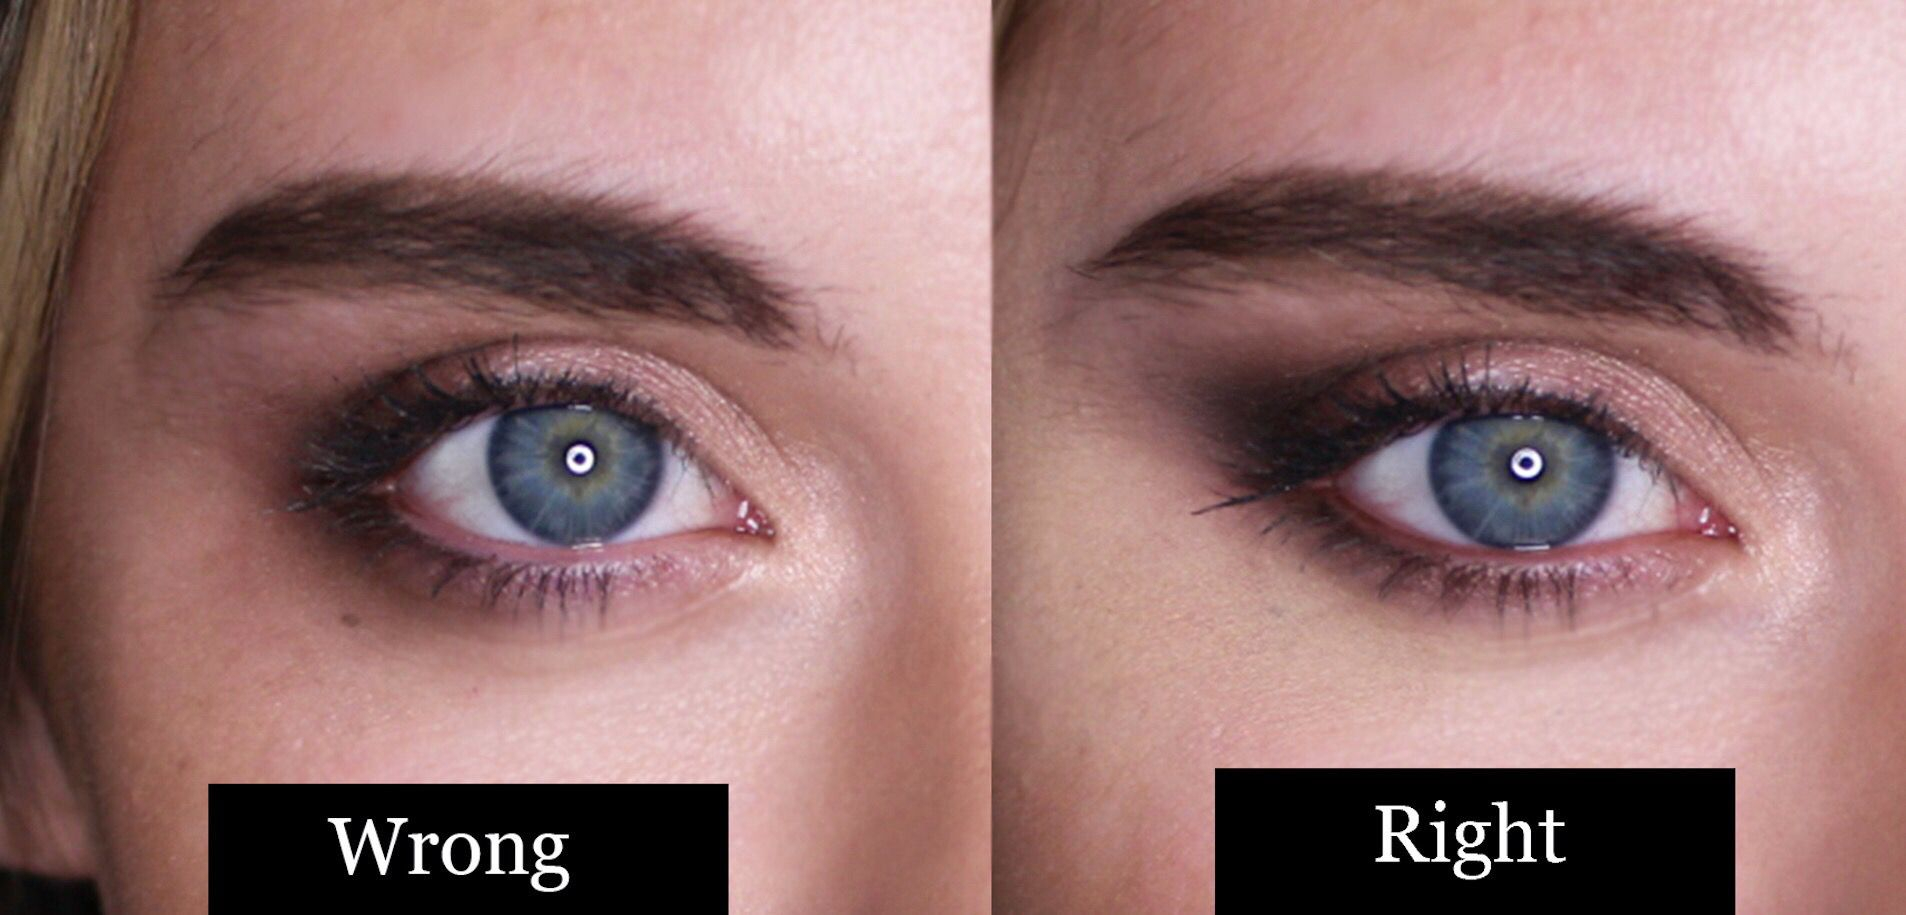 Shimmery Eye Makeup How To Apply Eyeshadow 12 Mistakes To Avoid